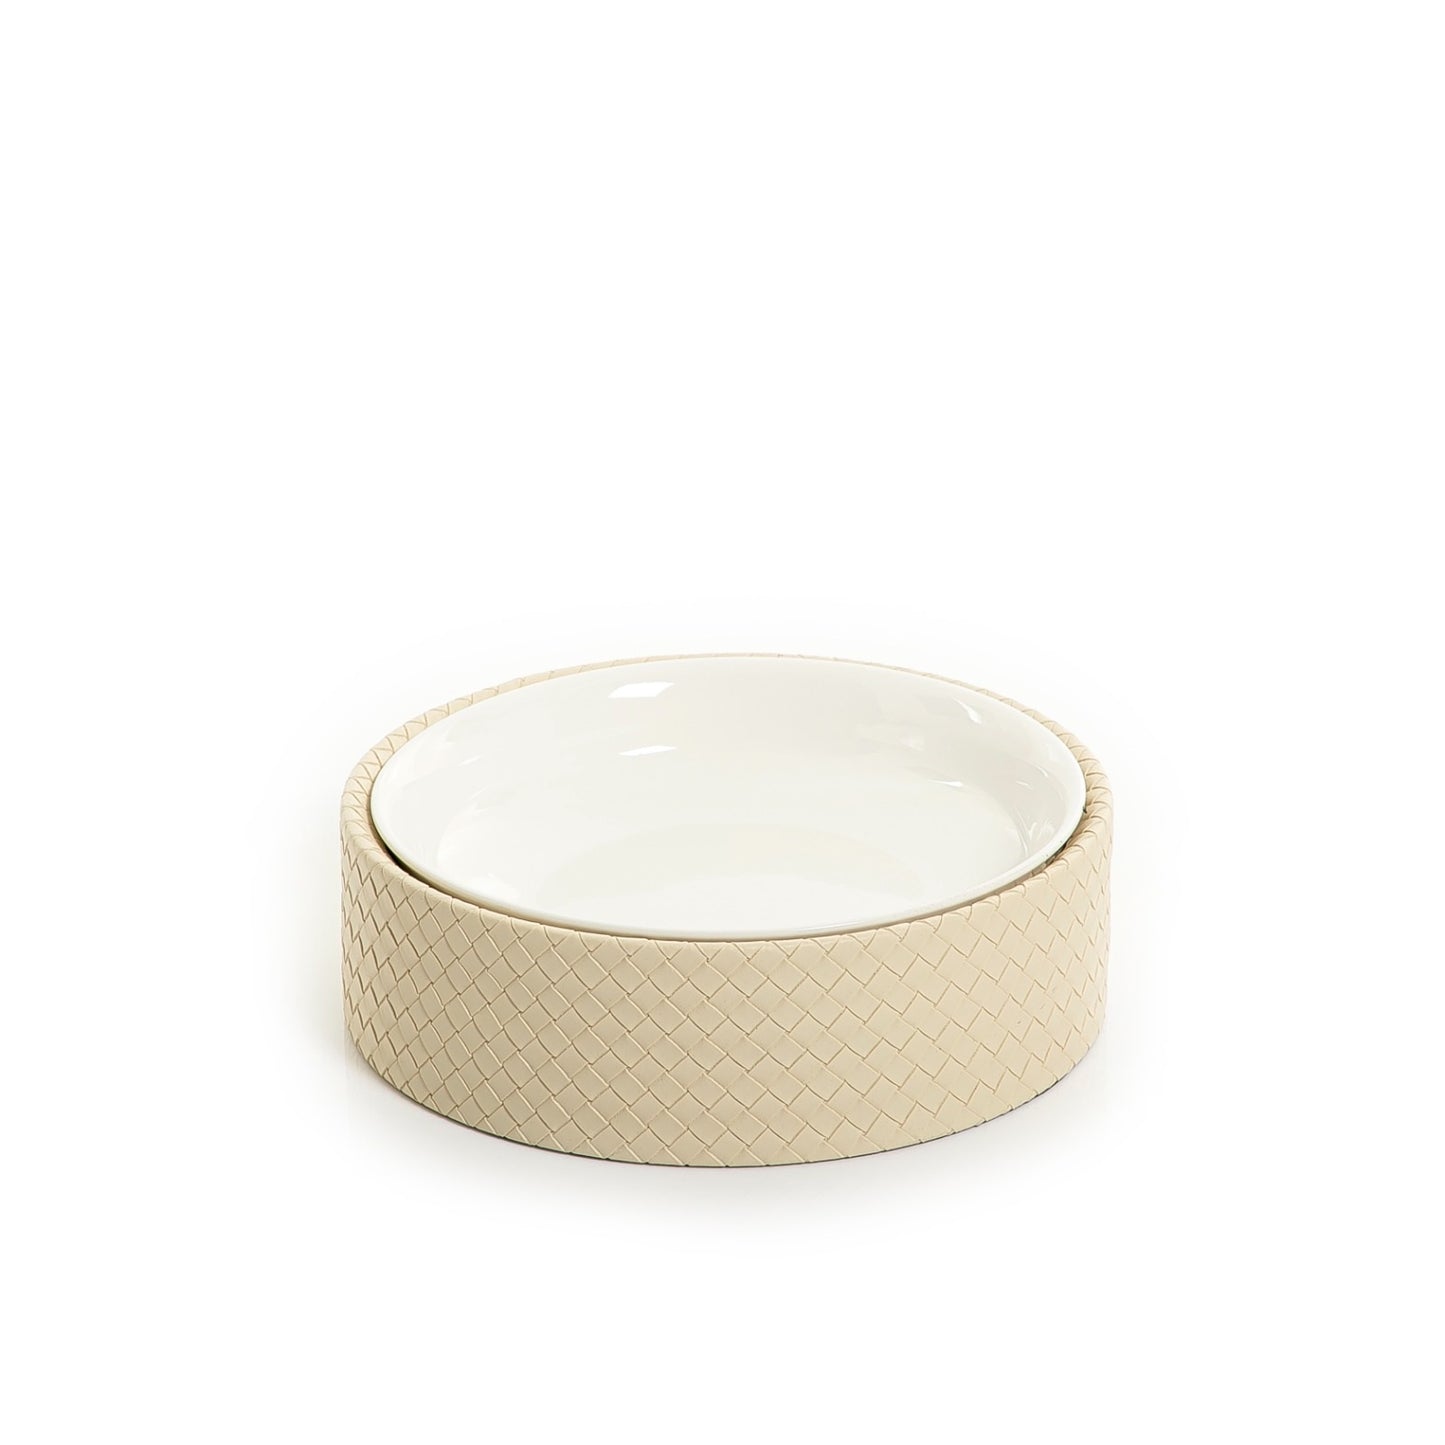 Ceramic Bowl with Leather Base - 26cm